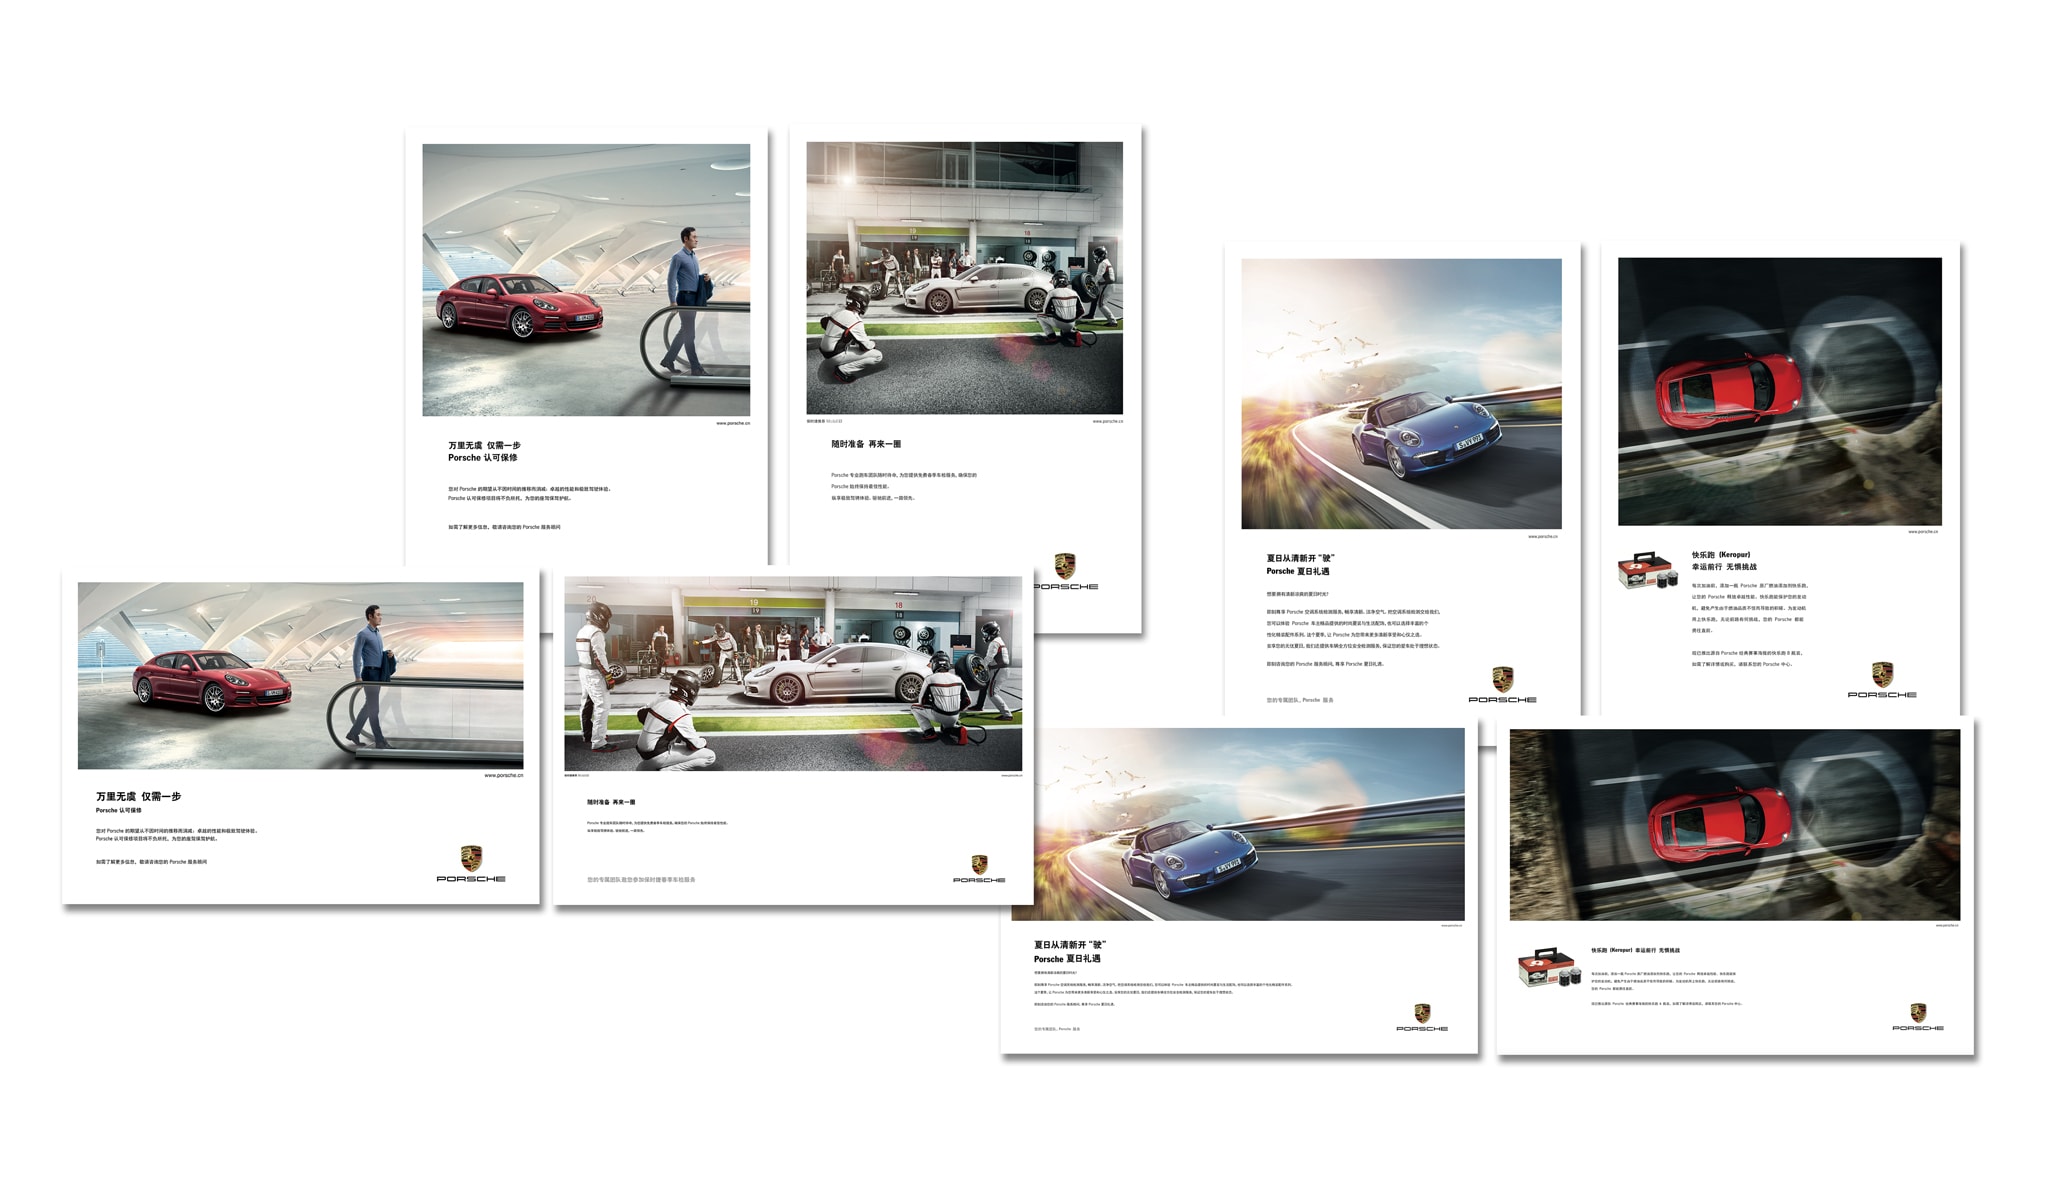 Porsche Aftersales Campaigns China